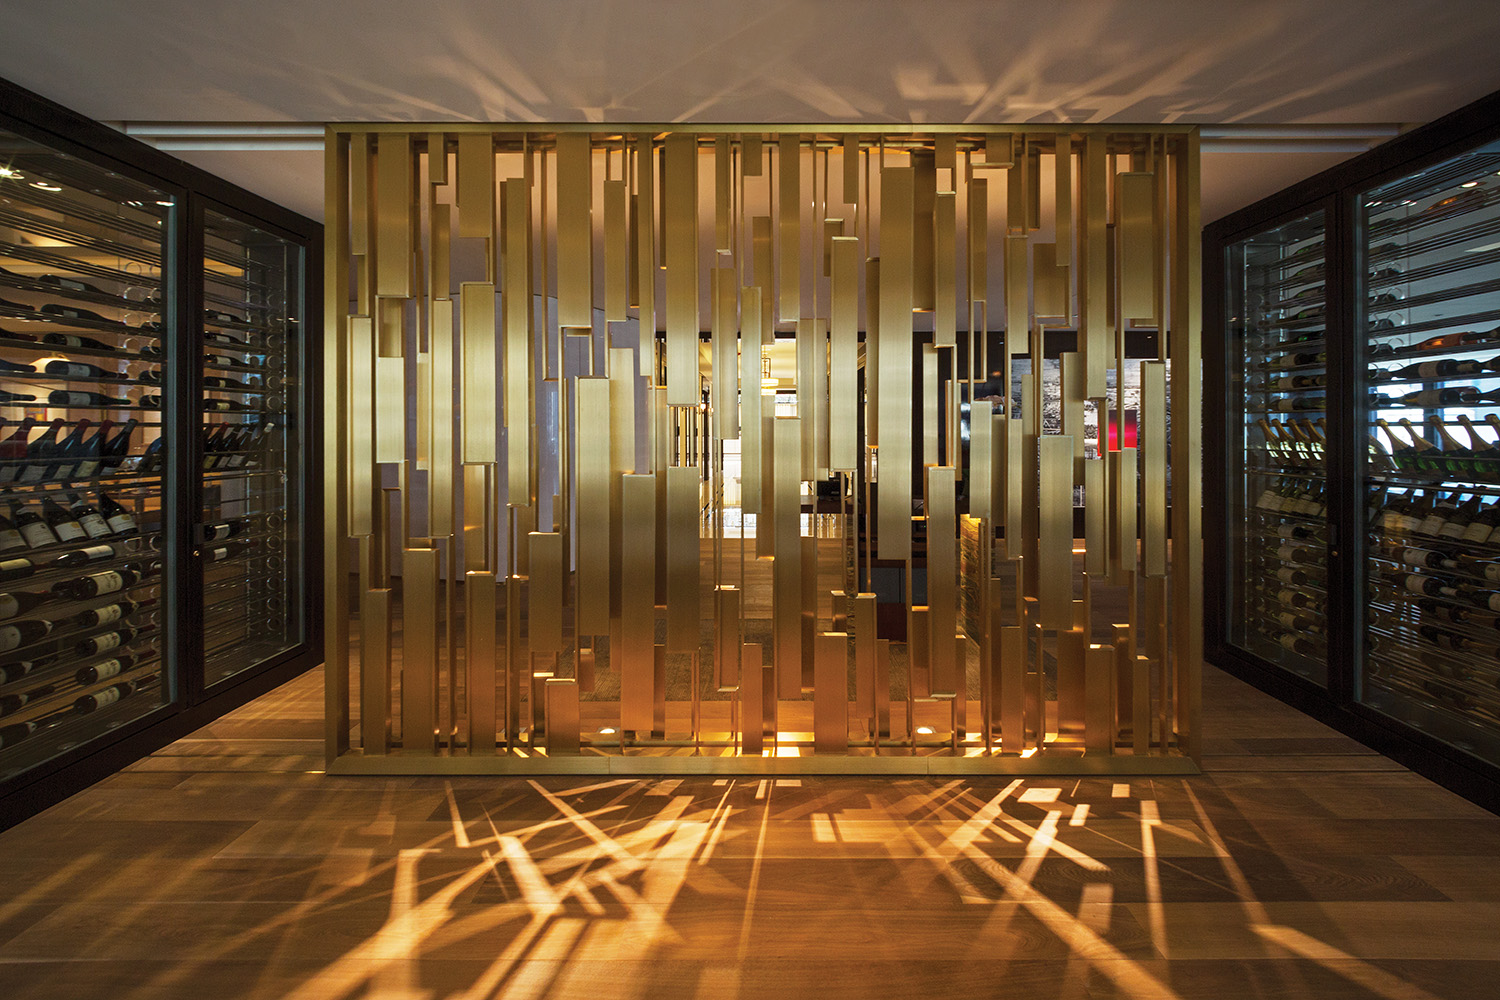 Langham Chicago Hotel / Interiors by Lohan Anderson, Richmond International & The Rockwell Group